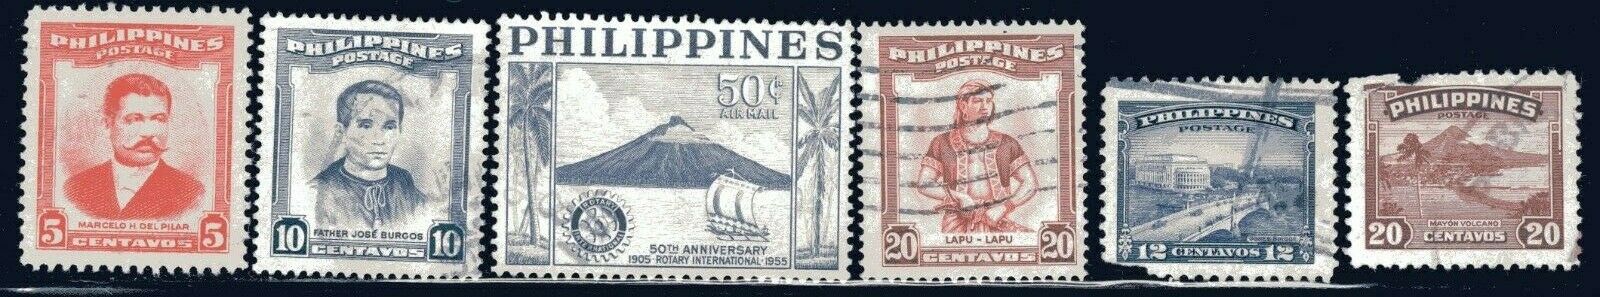 1950s Philippines Stamps  6-lot Used